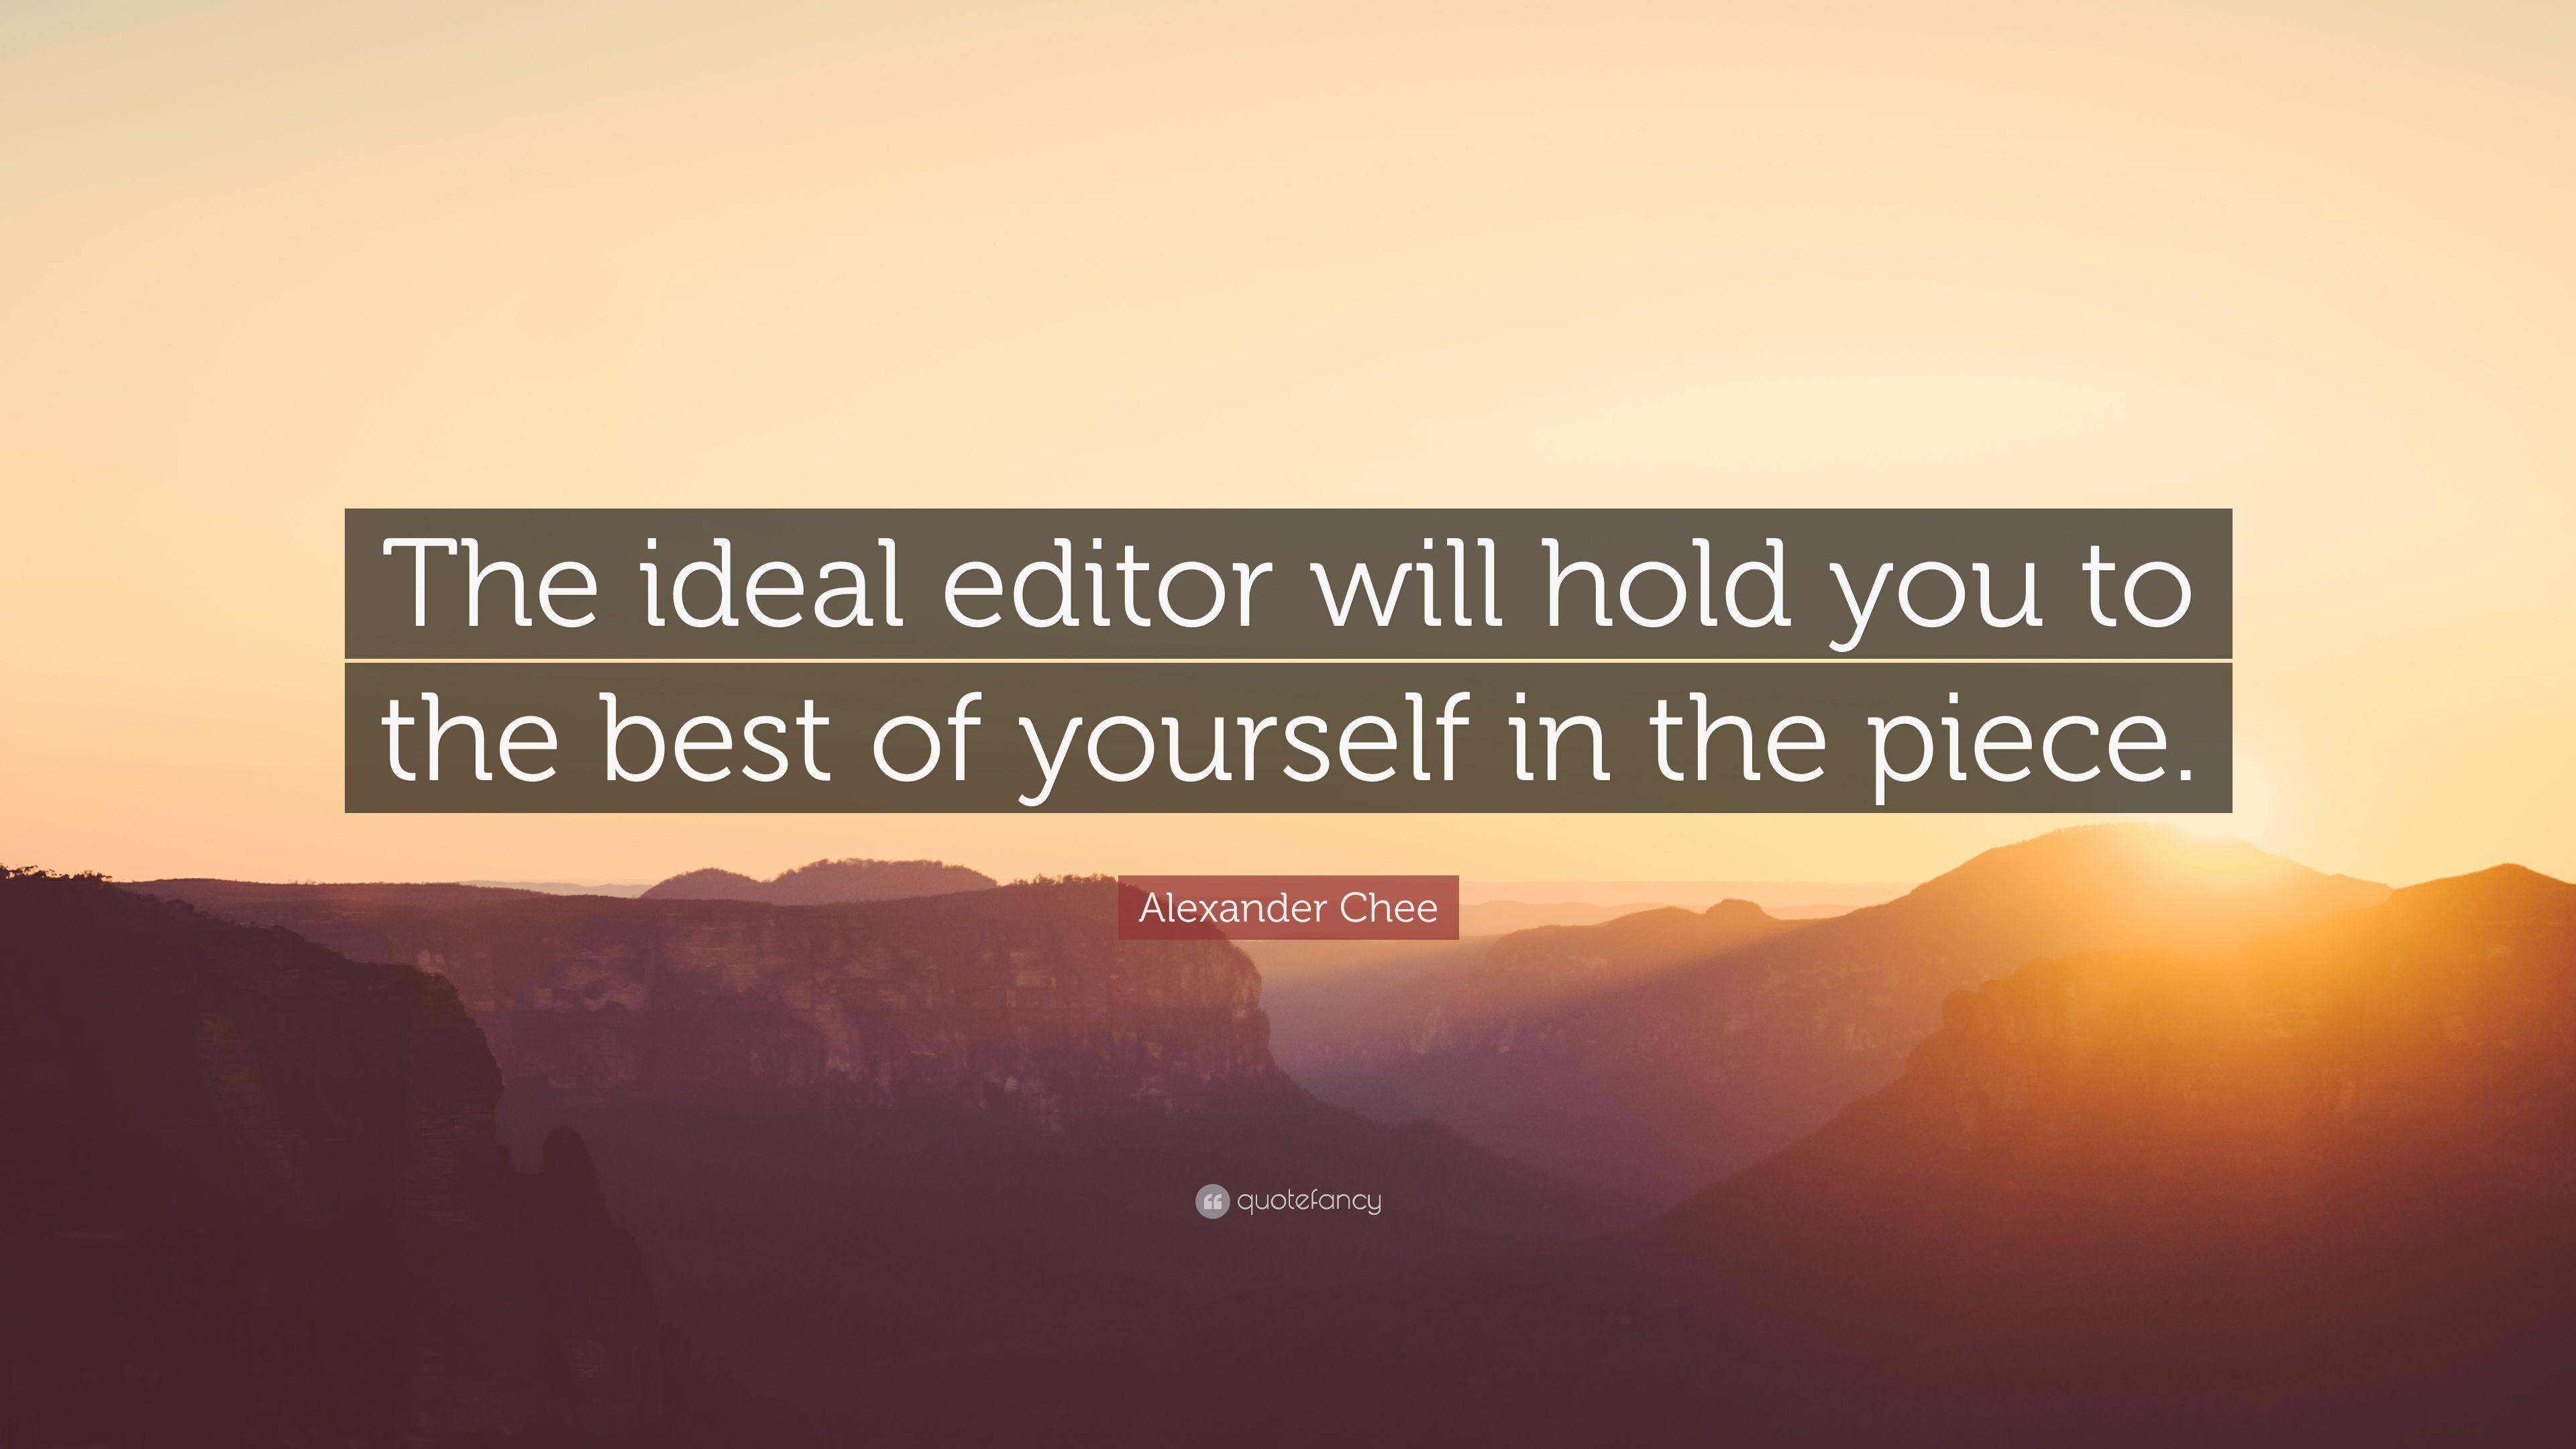 Alexander Chee Quote: “The ideal editor will hold you to the best